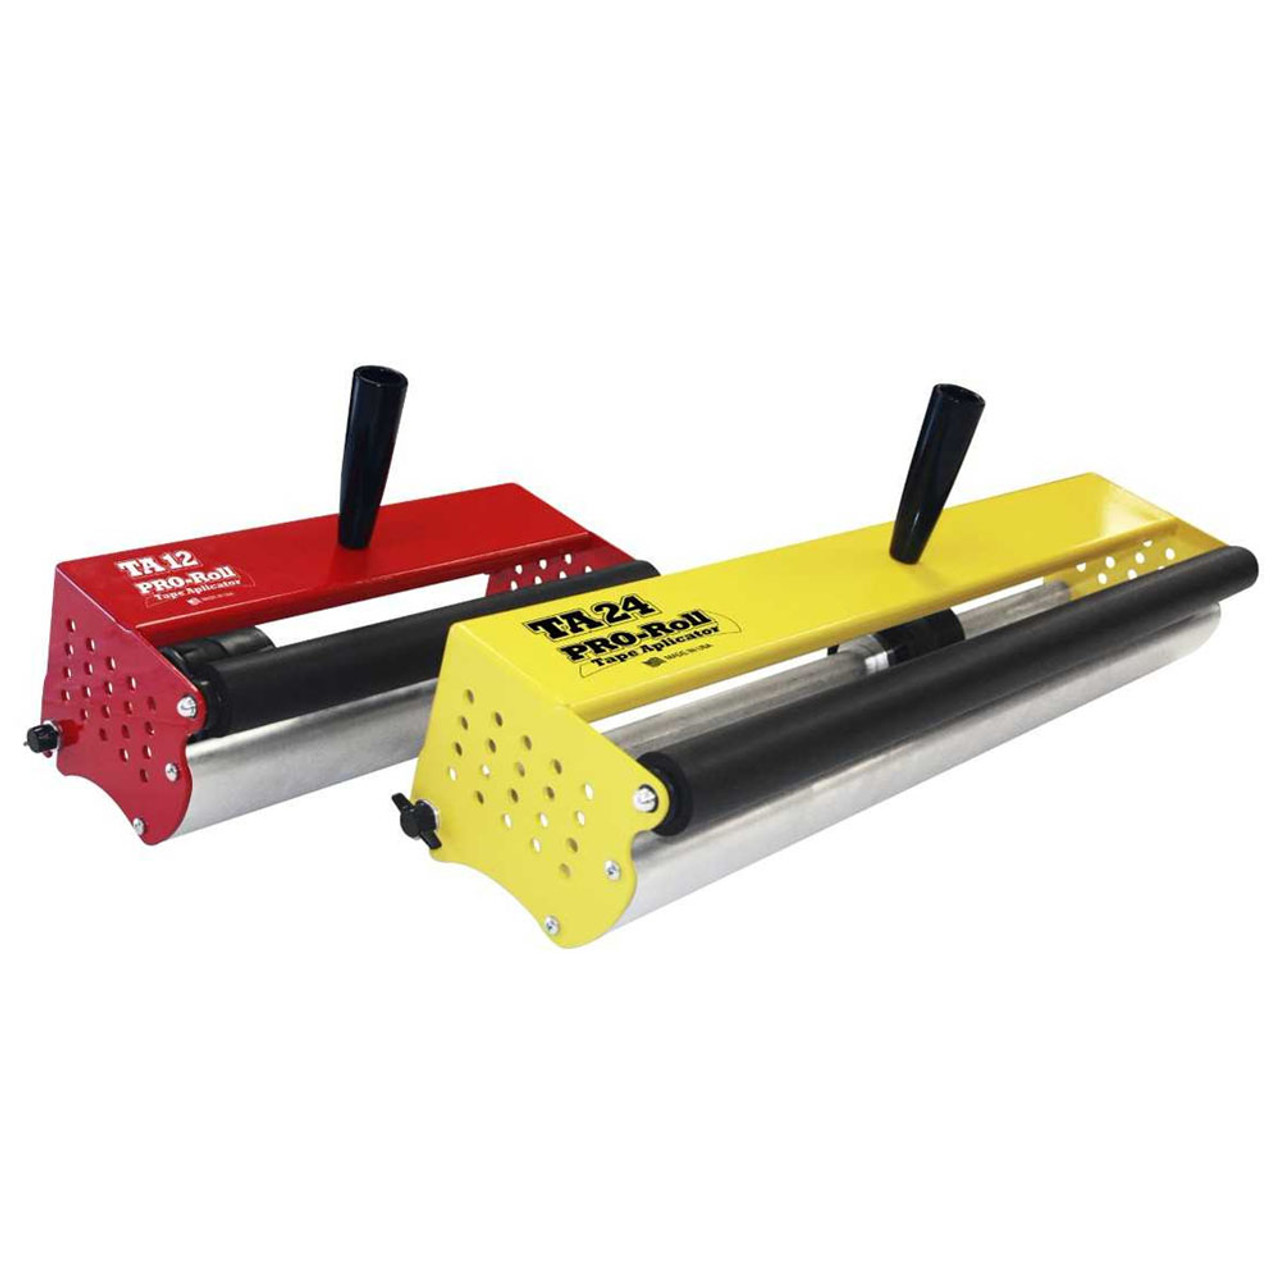 Cutter & Dispenser Compatible with all rolls - 24